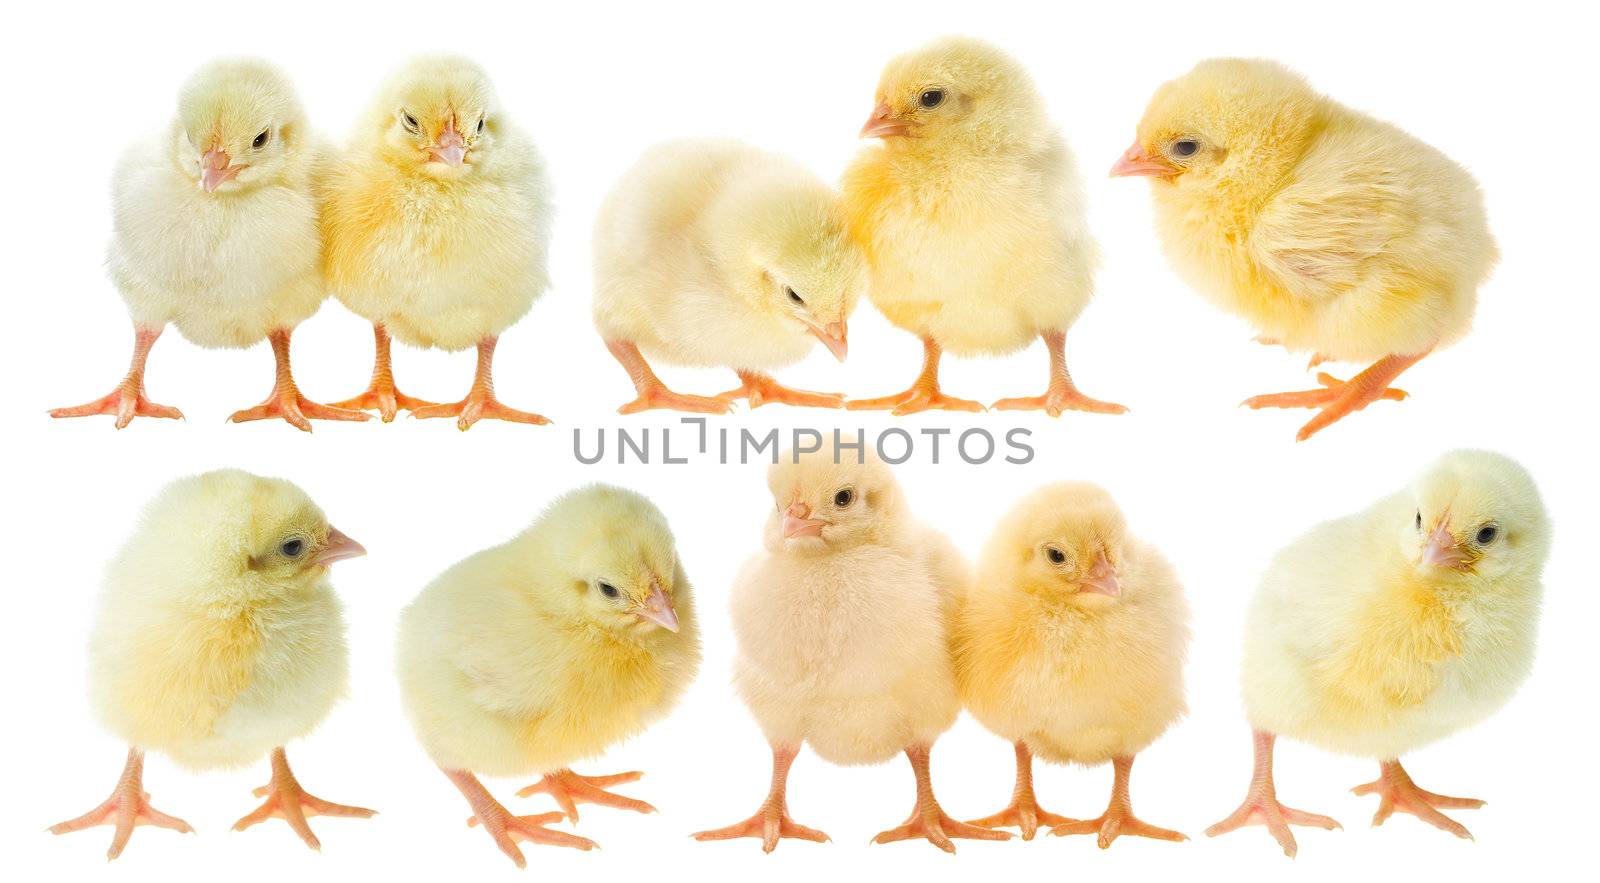 small chicks collection, isolated on white